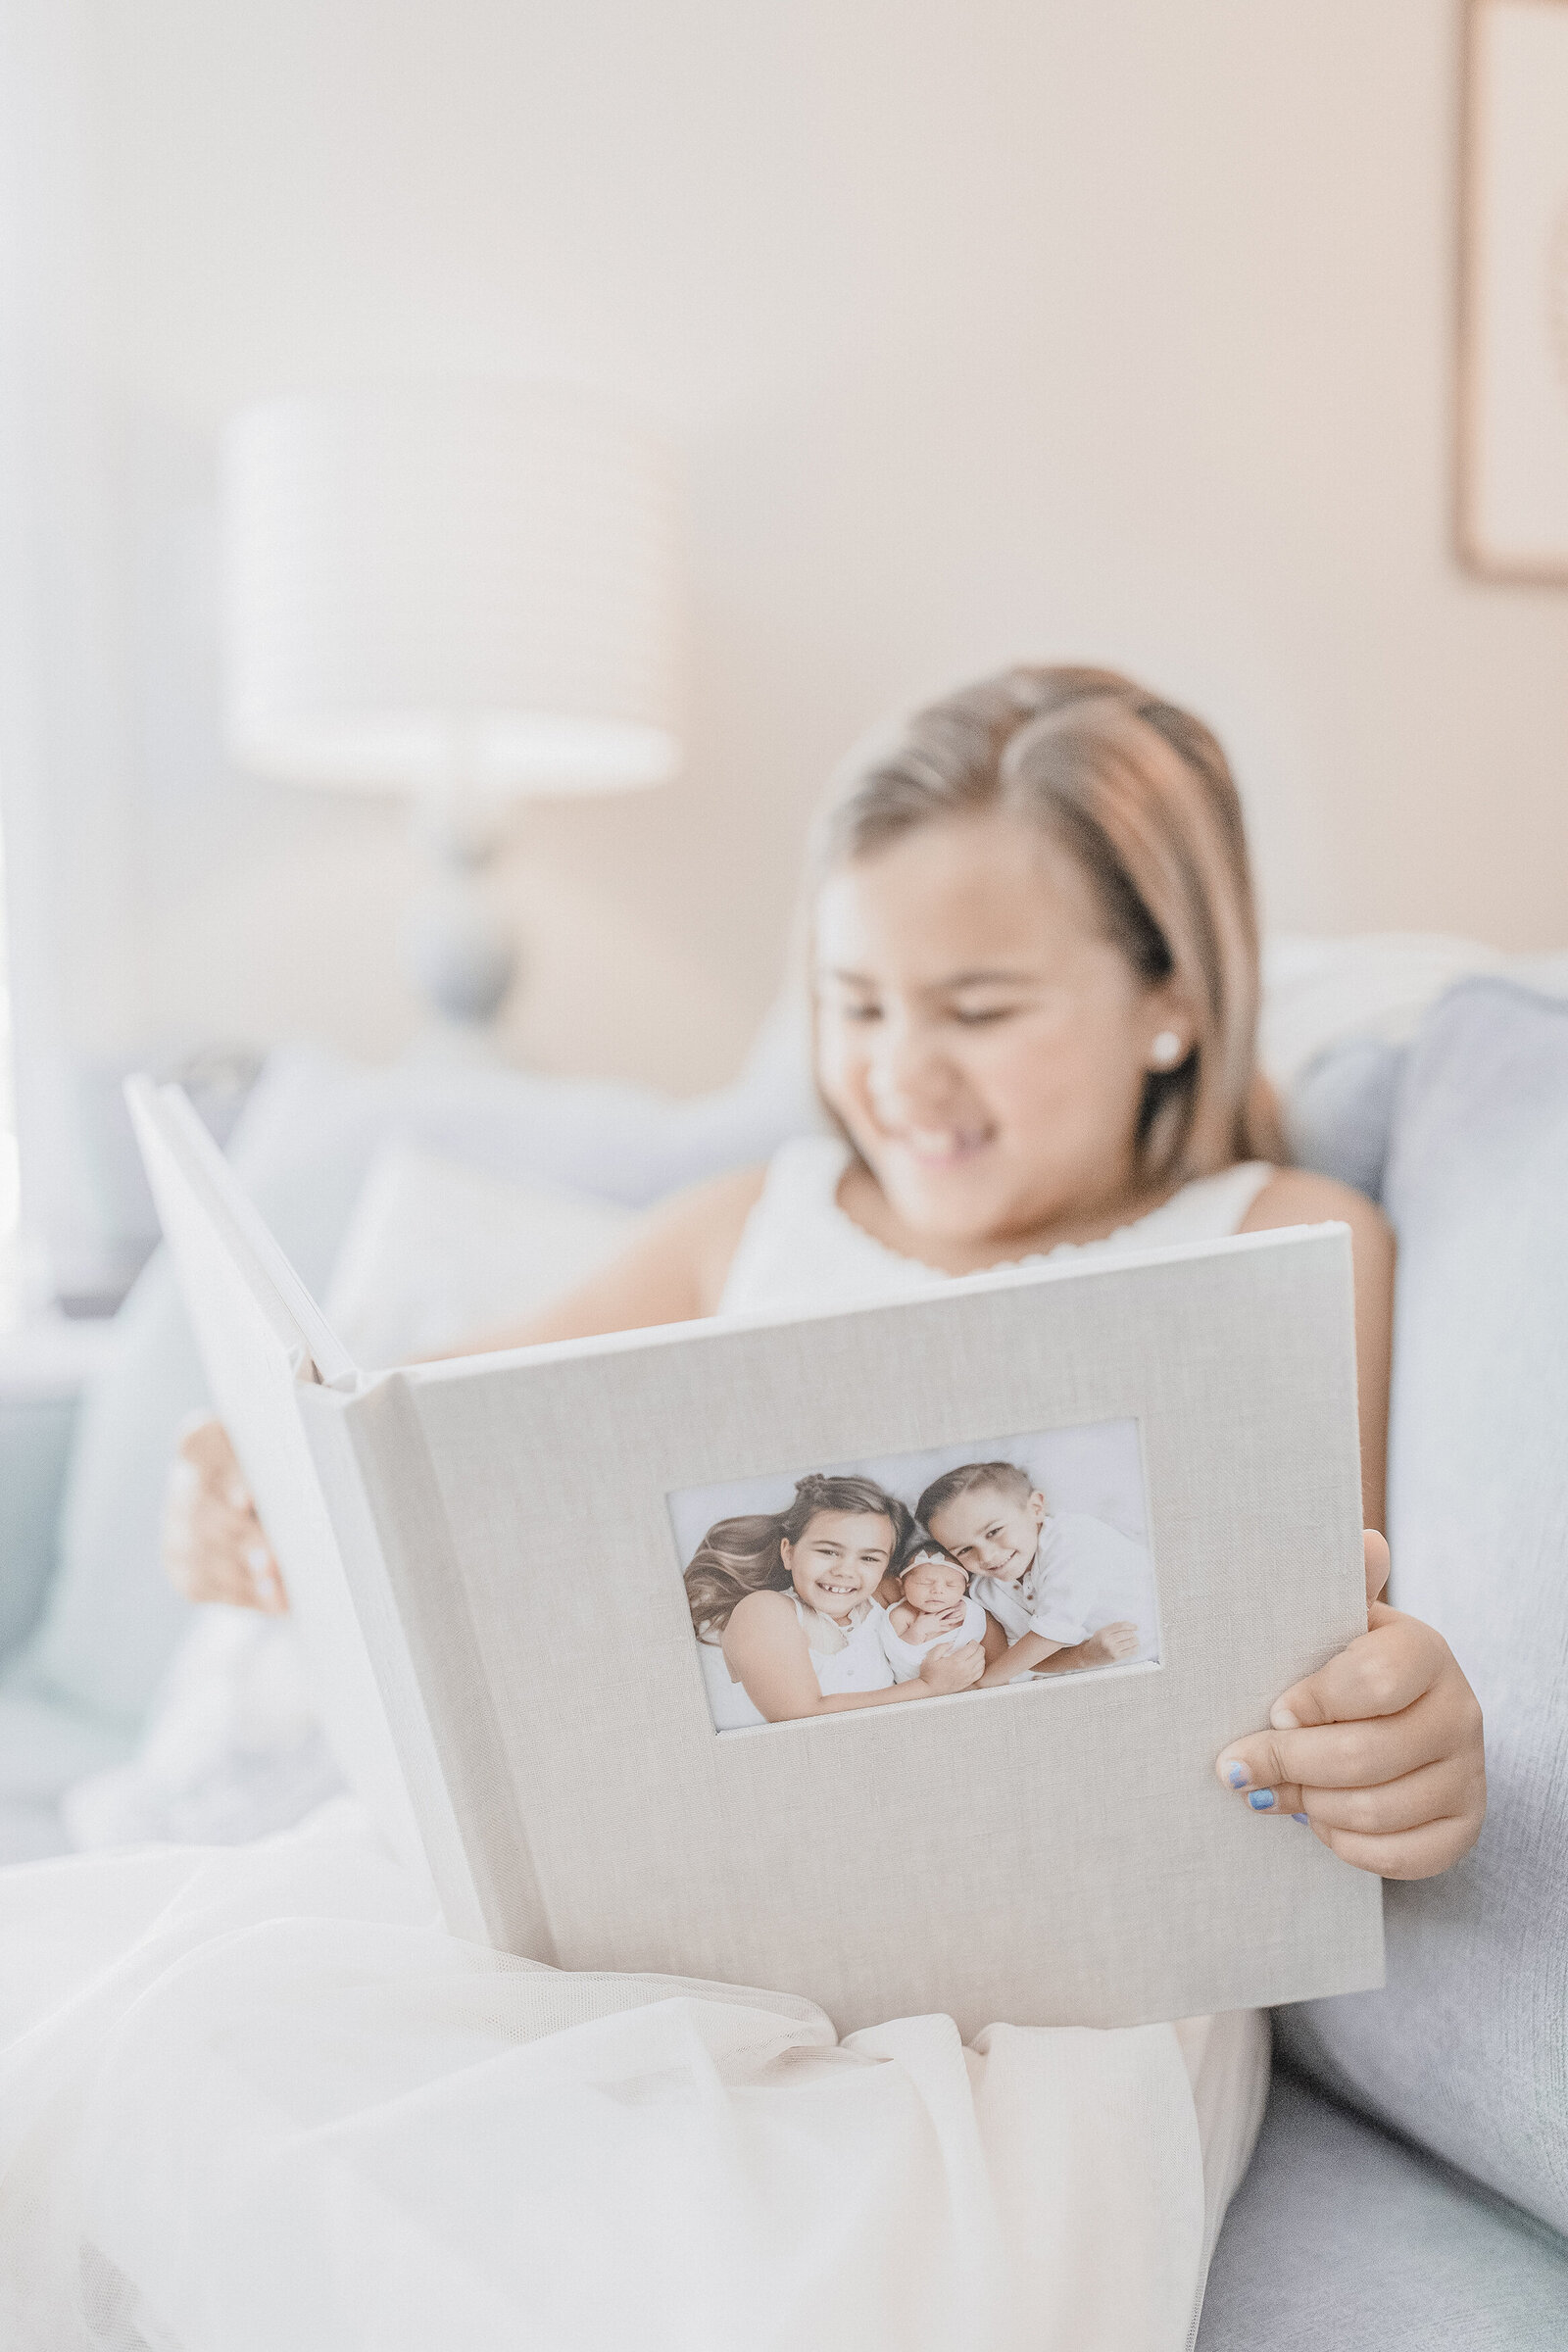 Little girl looking at album on couch smiling